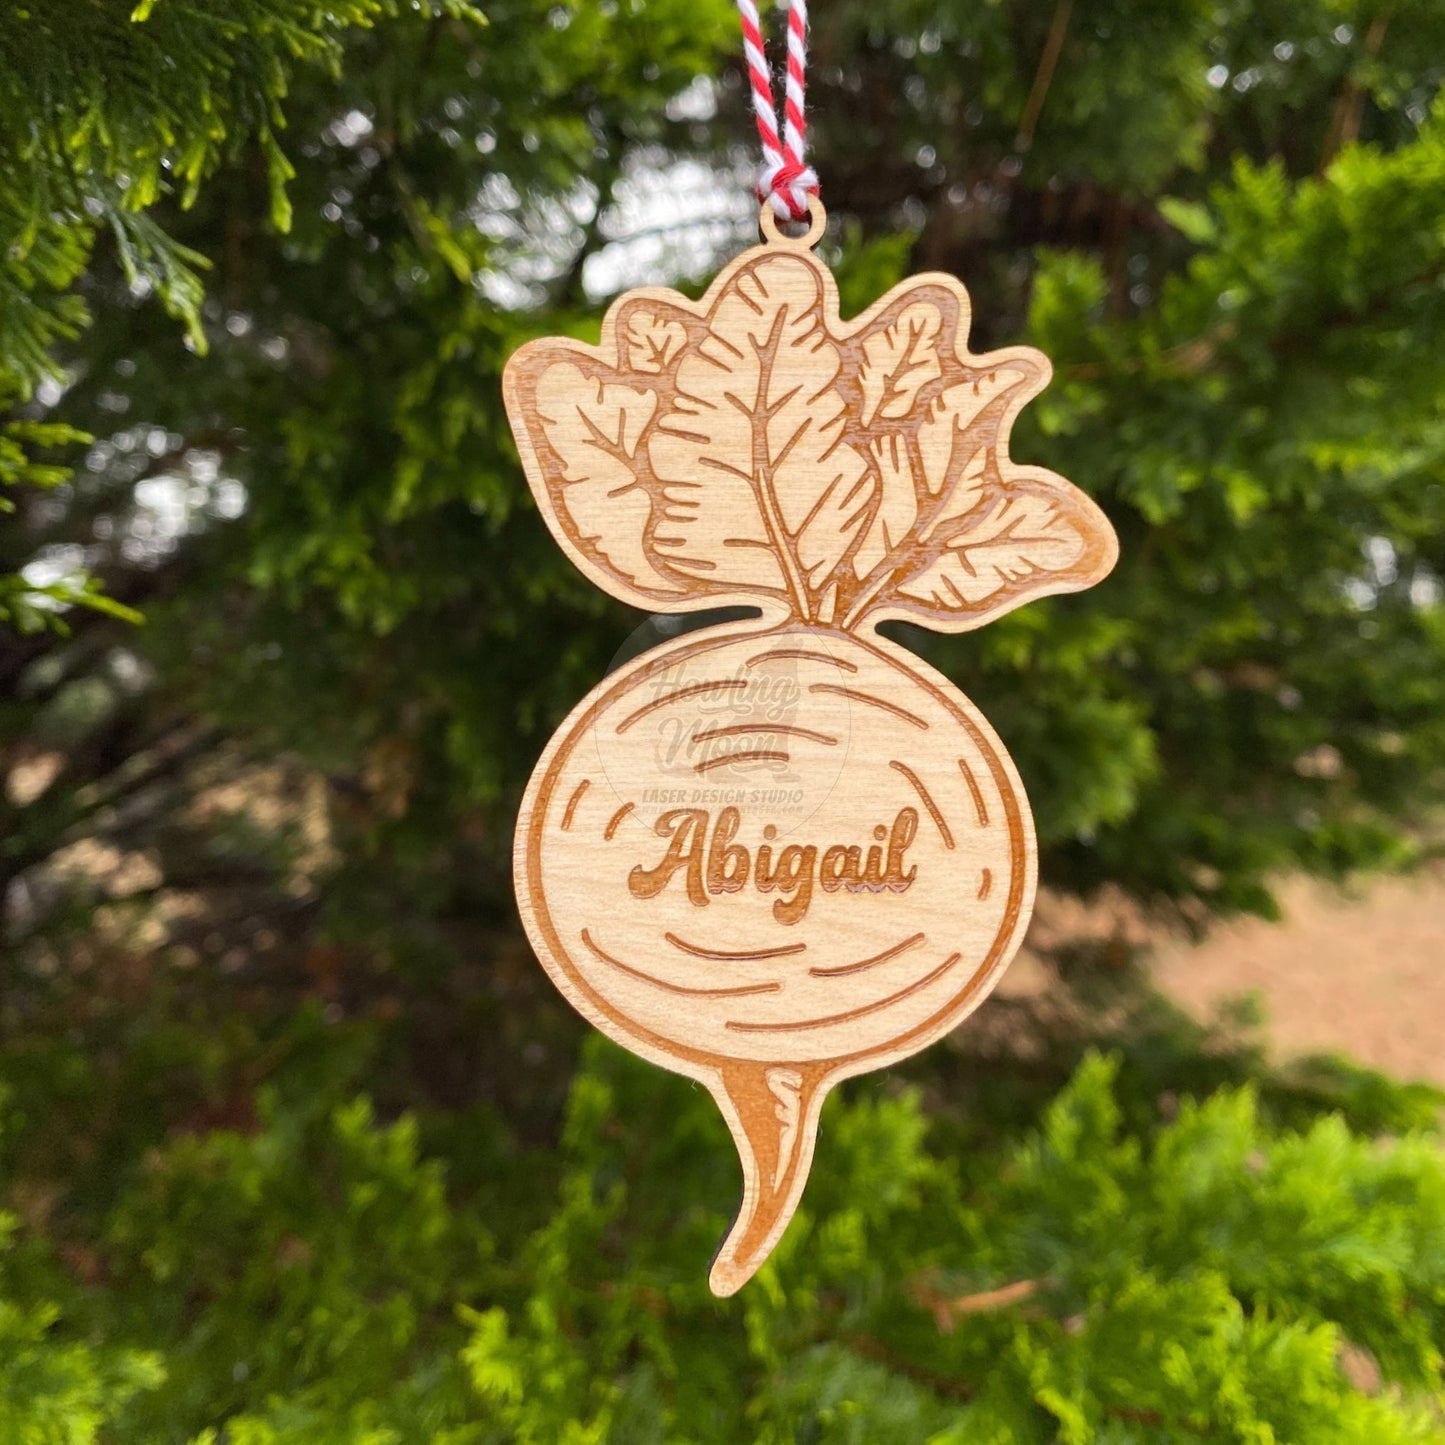 Personalized garden beet ornament with red & white twine ribbon hanging from a coniferous tree - made by Howling Moon Laser Design Virginia USA